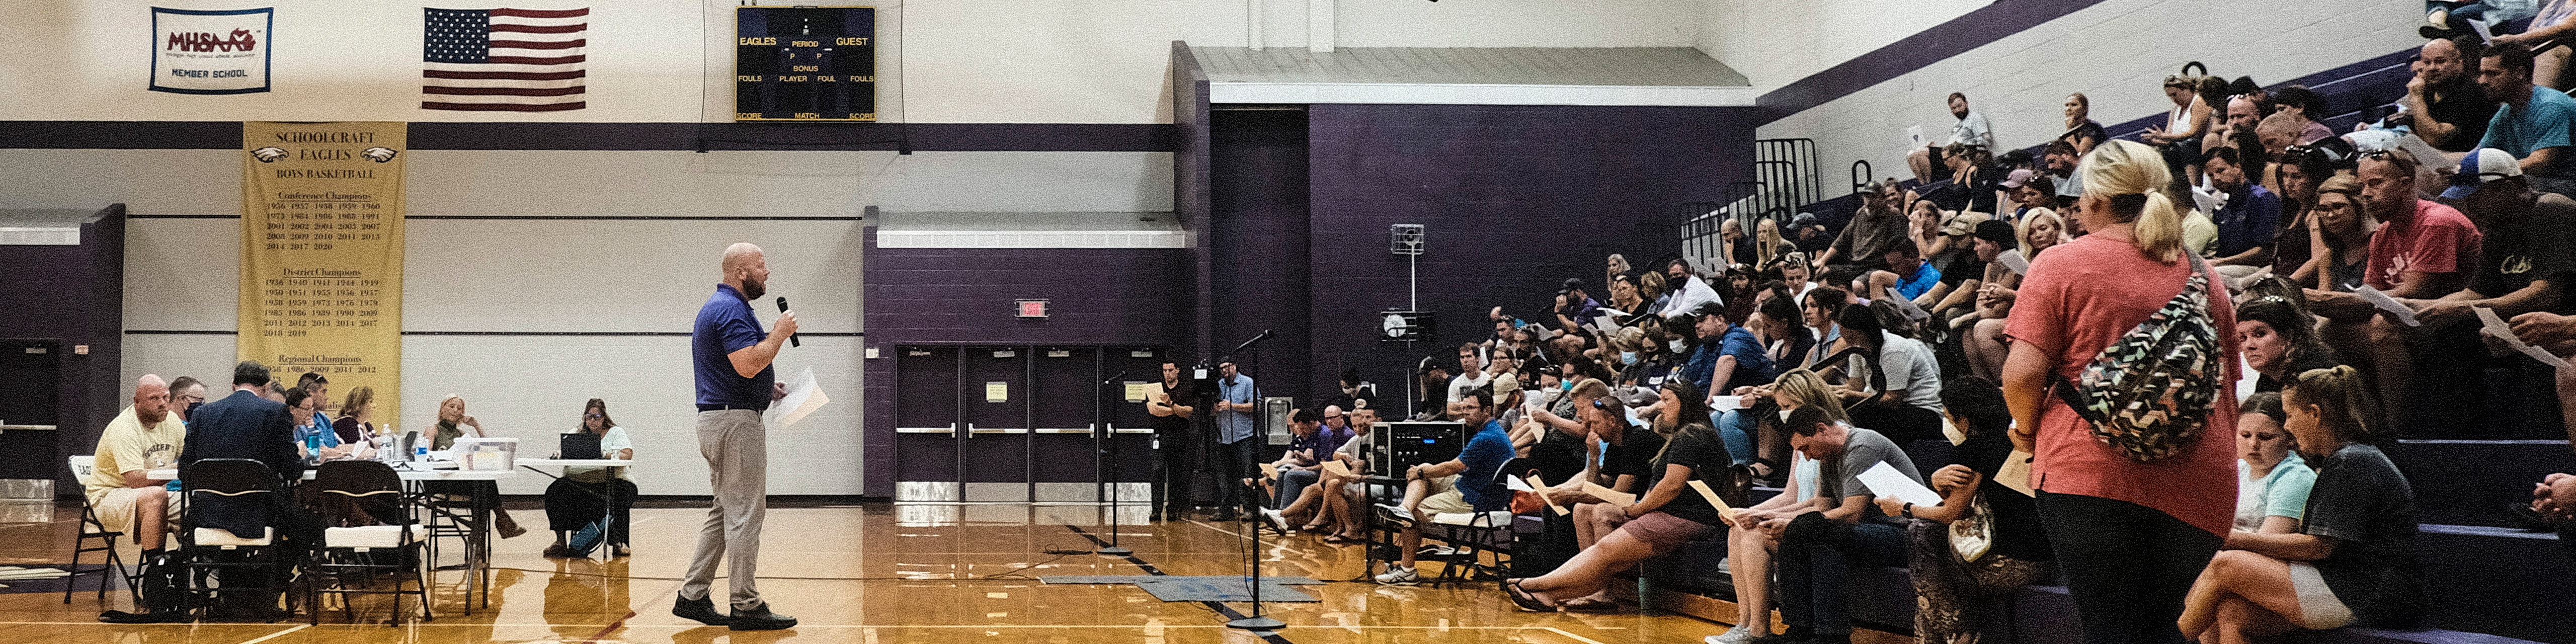 People attend a special Board of Education Meeting on mask mandates for students and staff in Kalamazoo County Schools at the Schoolcraft High School Gymnasium on August 23, 2021 in Schoolcraft, Michigan.